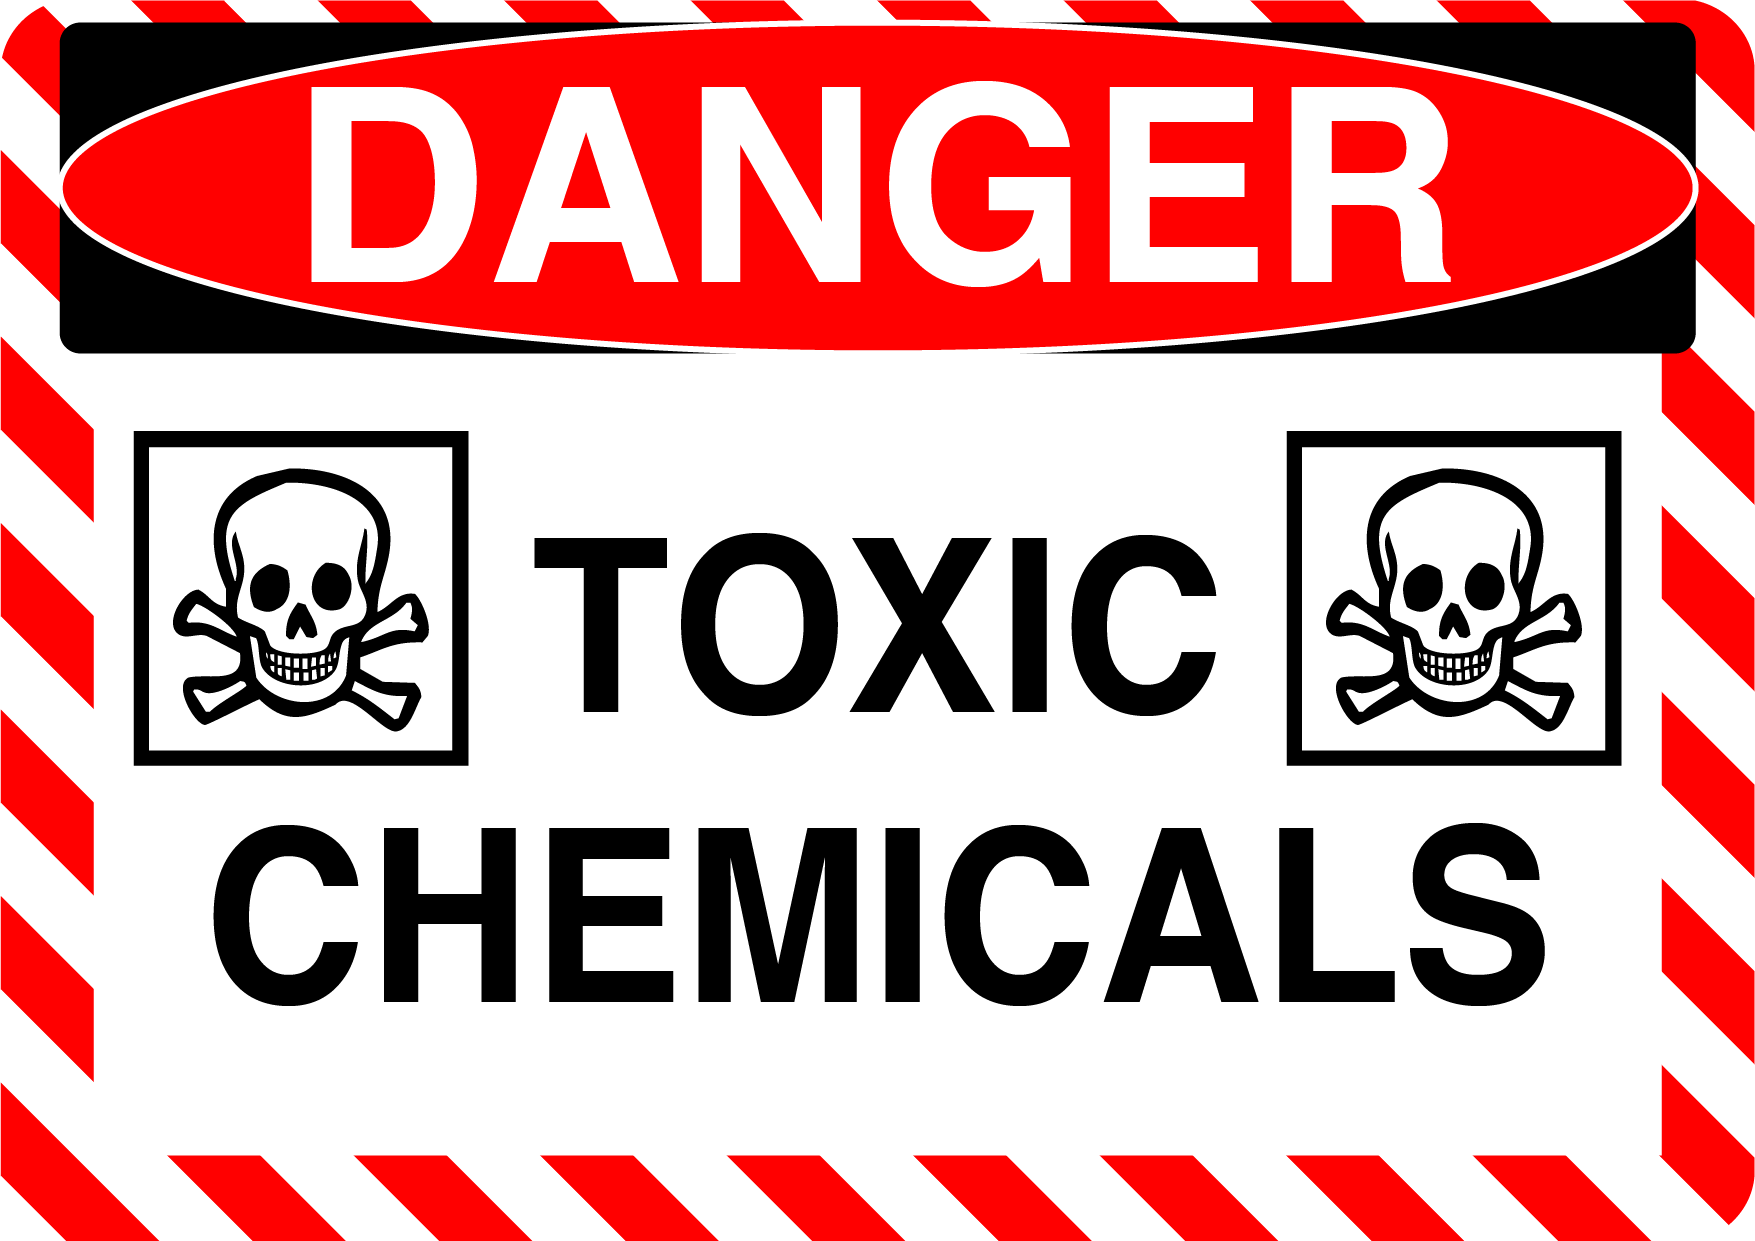 Danger "Toxic Chemicals" Durable Matte Laminated Vinyl Floor Sign- Various Sizes Available